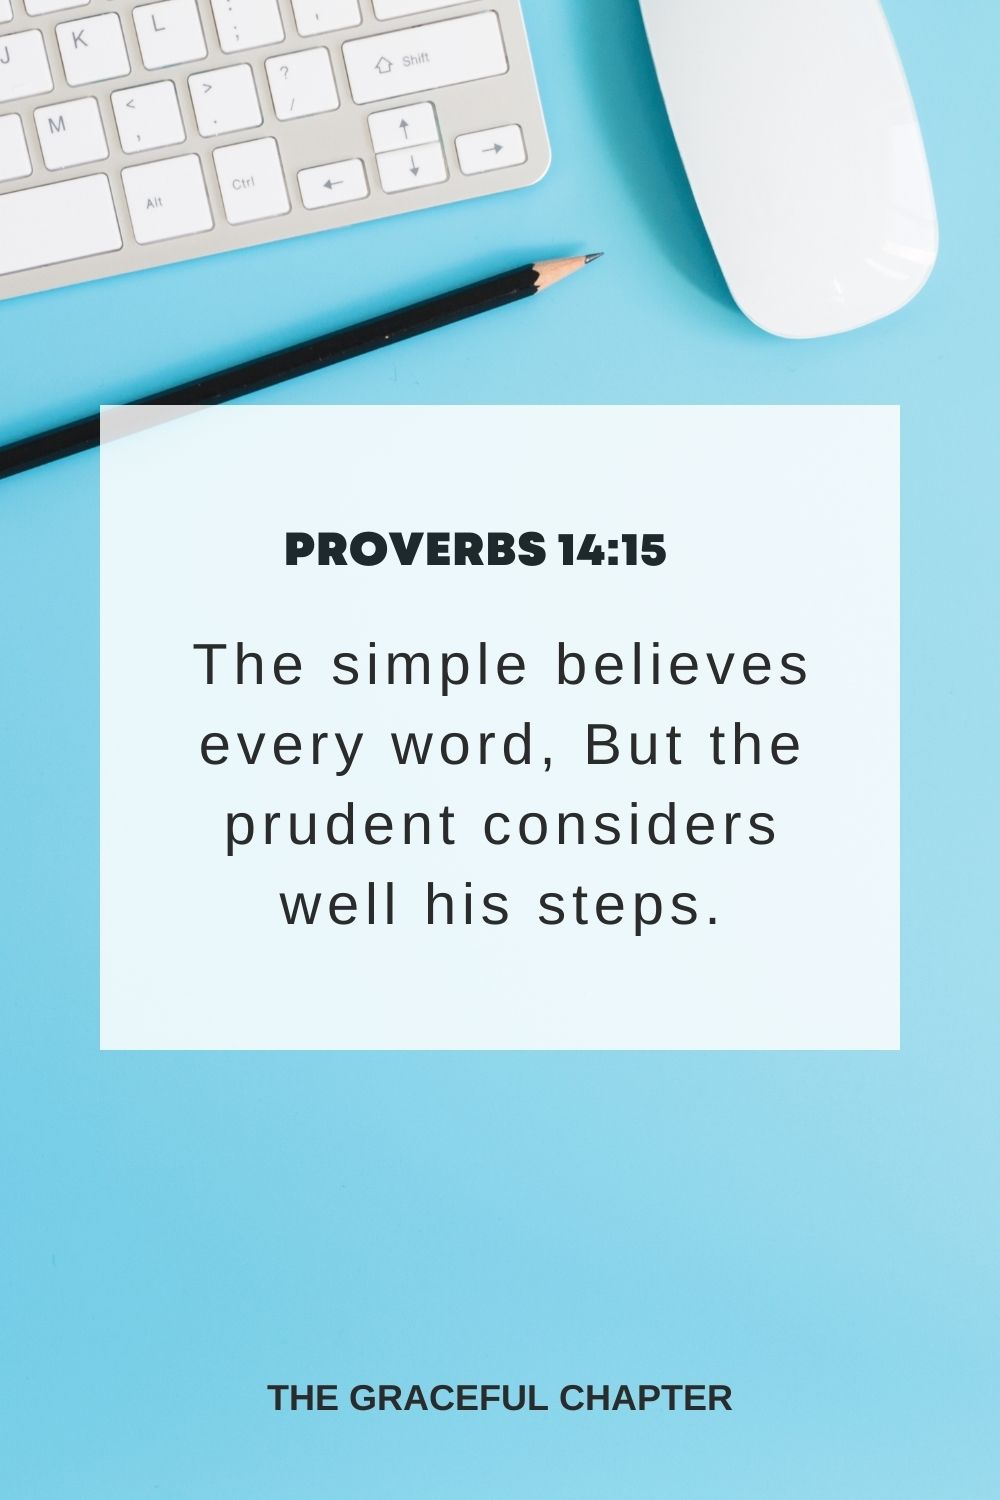 The simple believes every word, But the prudent considers well his steps. Proverbs 14:15